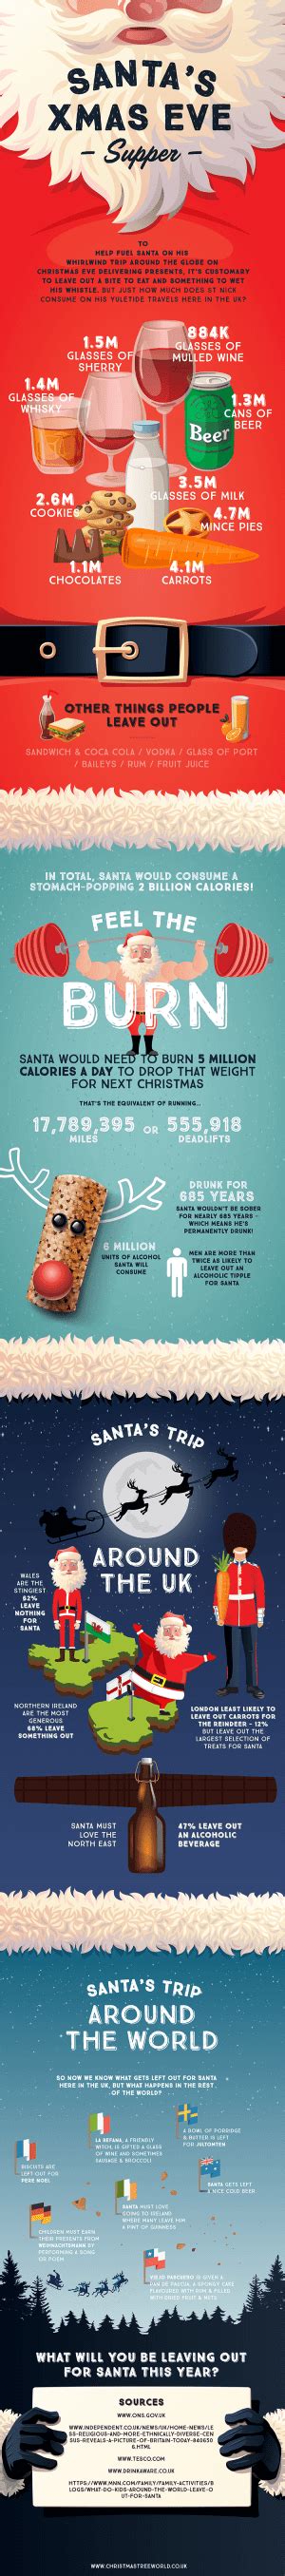 What Does Santas Diet Consist Of Infographic